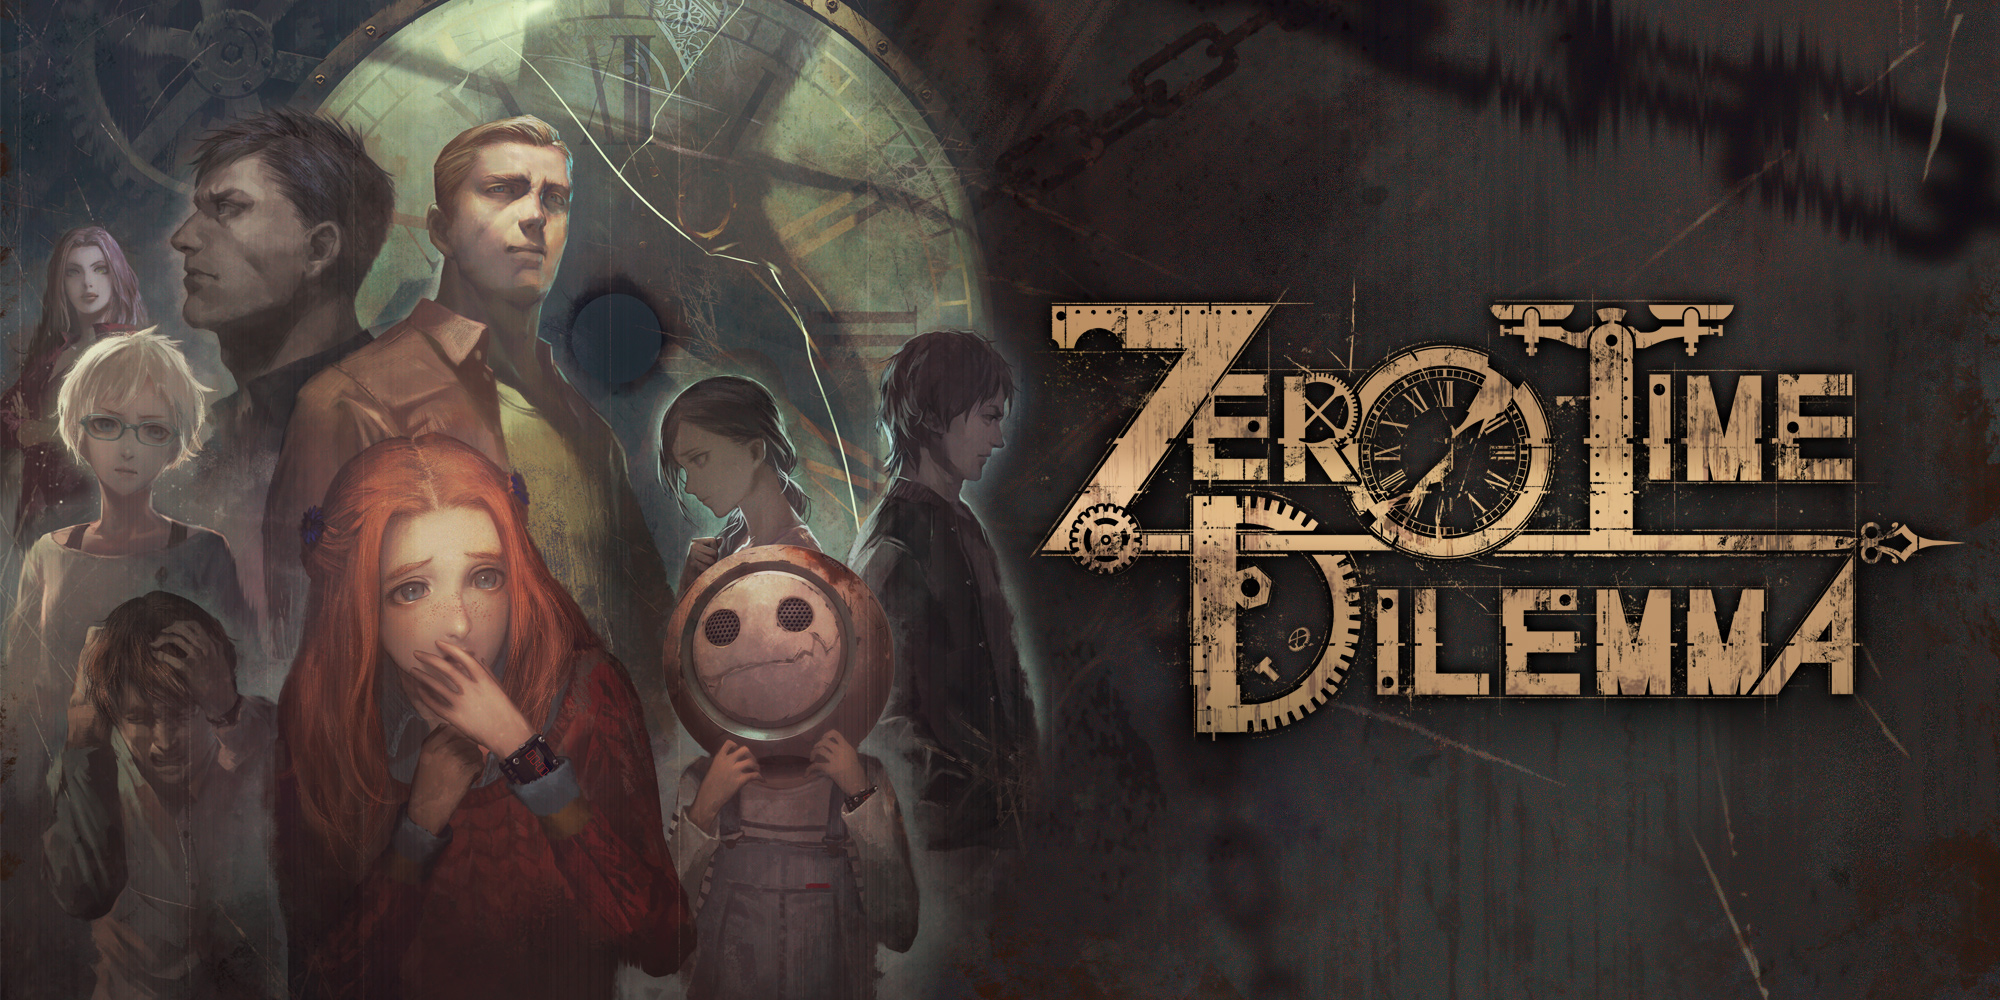 promotional art for Zero Escape: Zero Time Dilemma. it features the game title and the cast of the 9 players of the decision game, with a clock and the shadow of the antagonist, Zero, in the background